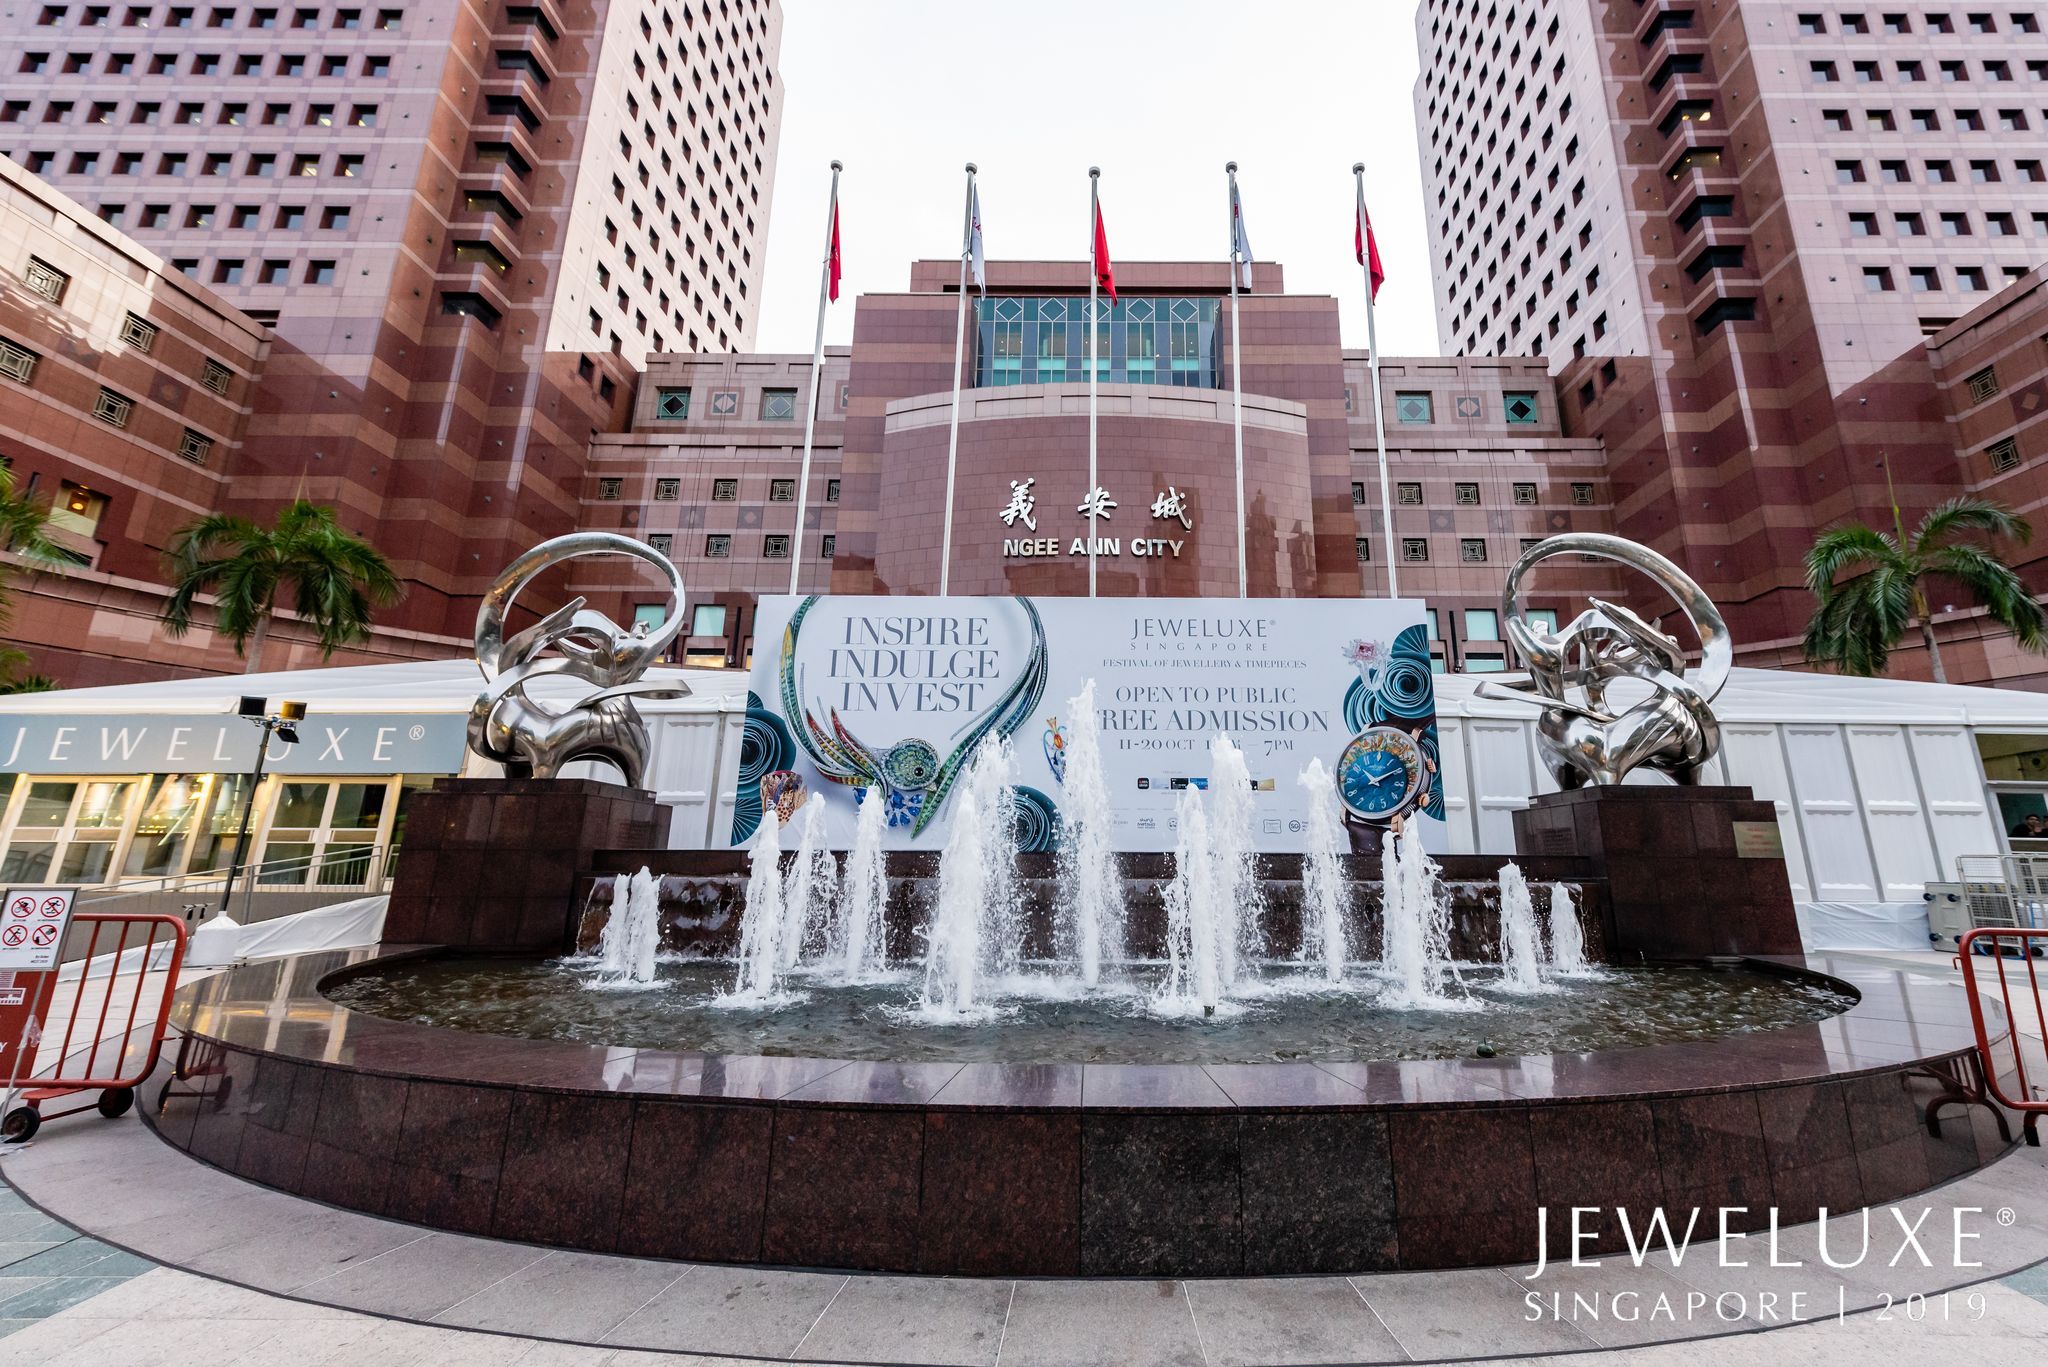 JeweLuxe takes place at the heart of Singapore’s shopping district 